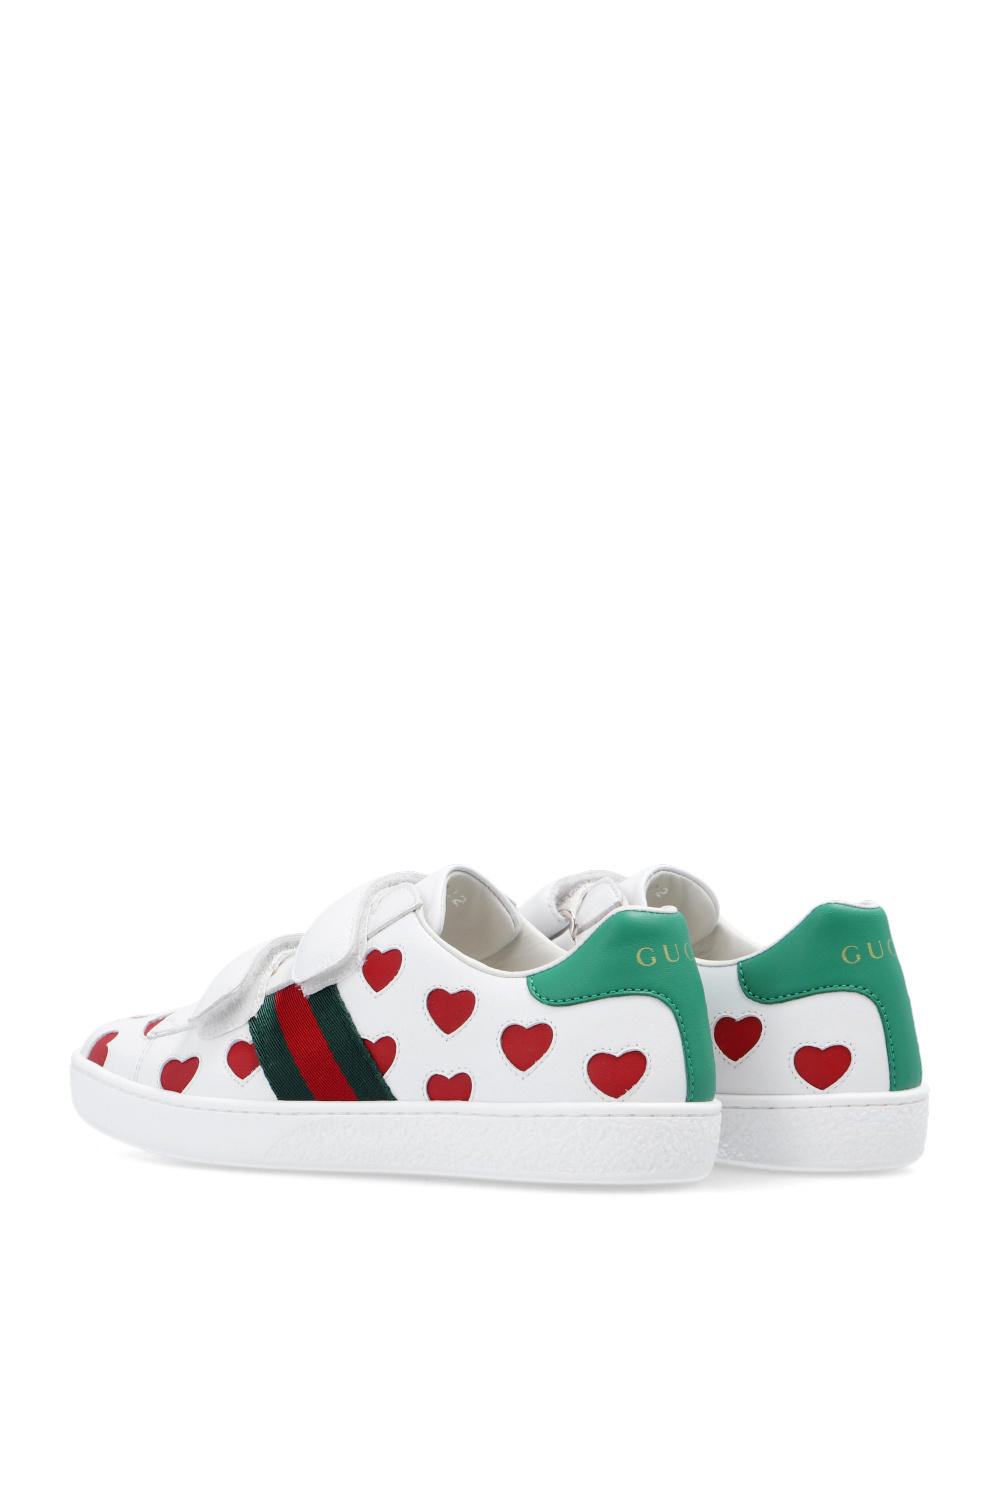 gucci Bee Kids Leather sneakers